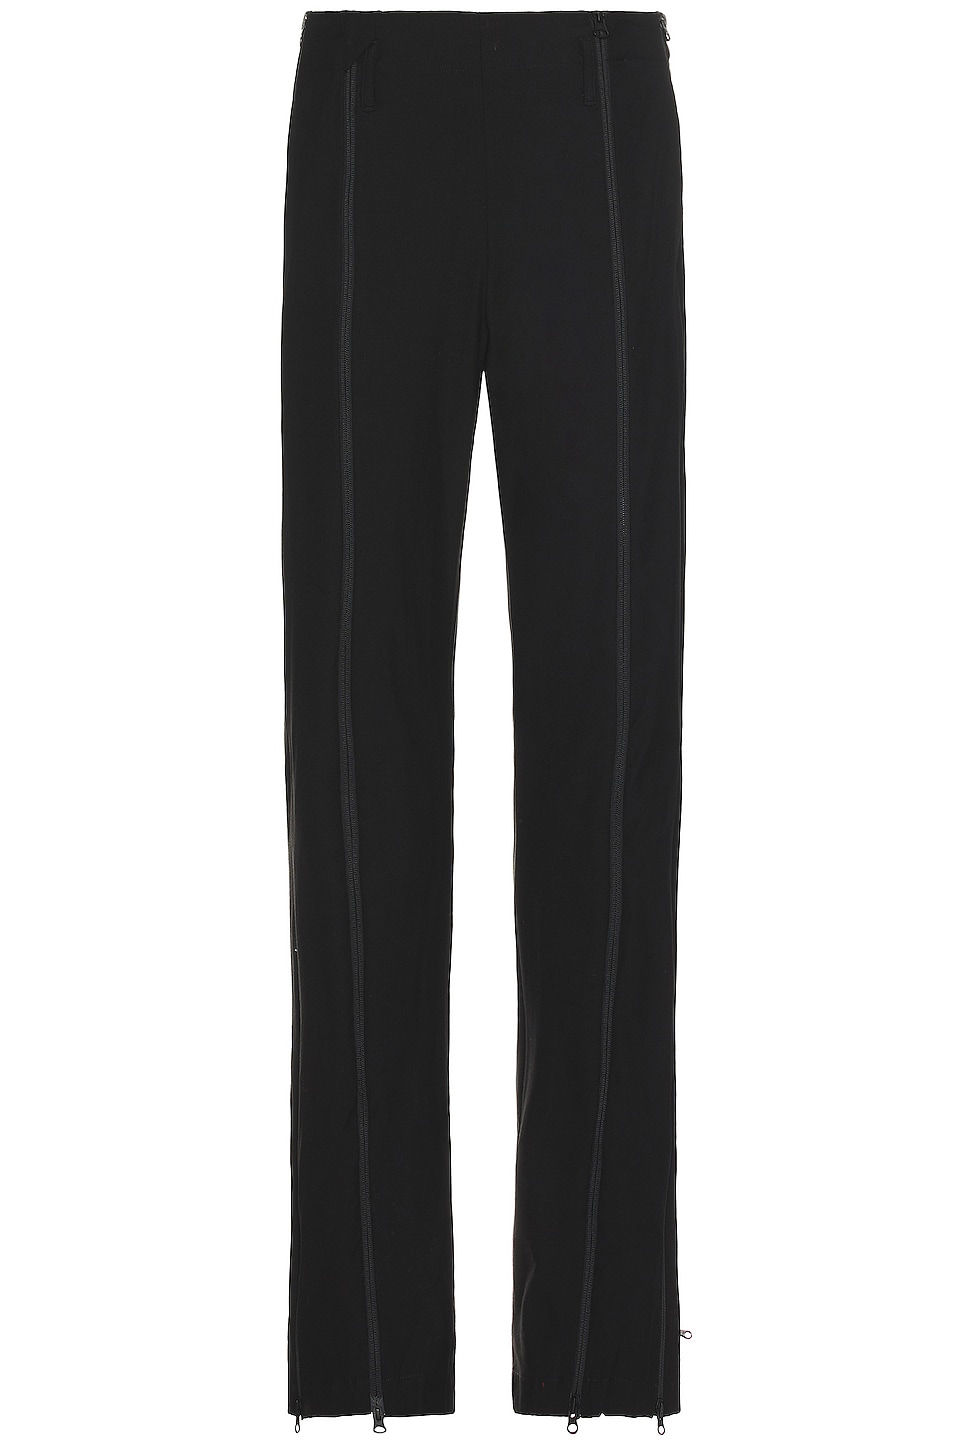 Image 1 of POST ARCHIVE FACTION (PAF) 5.1 Technical Pants Center in BLACK